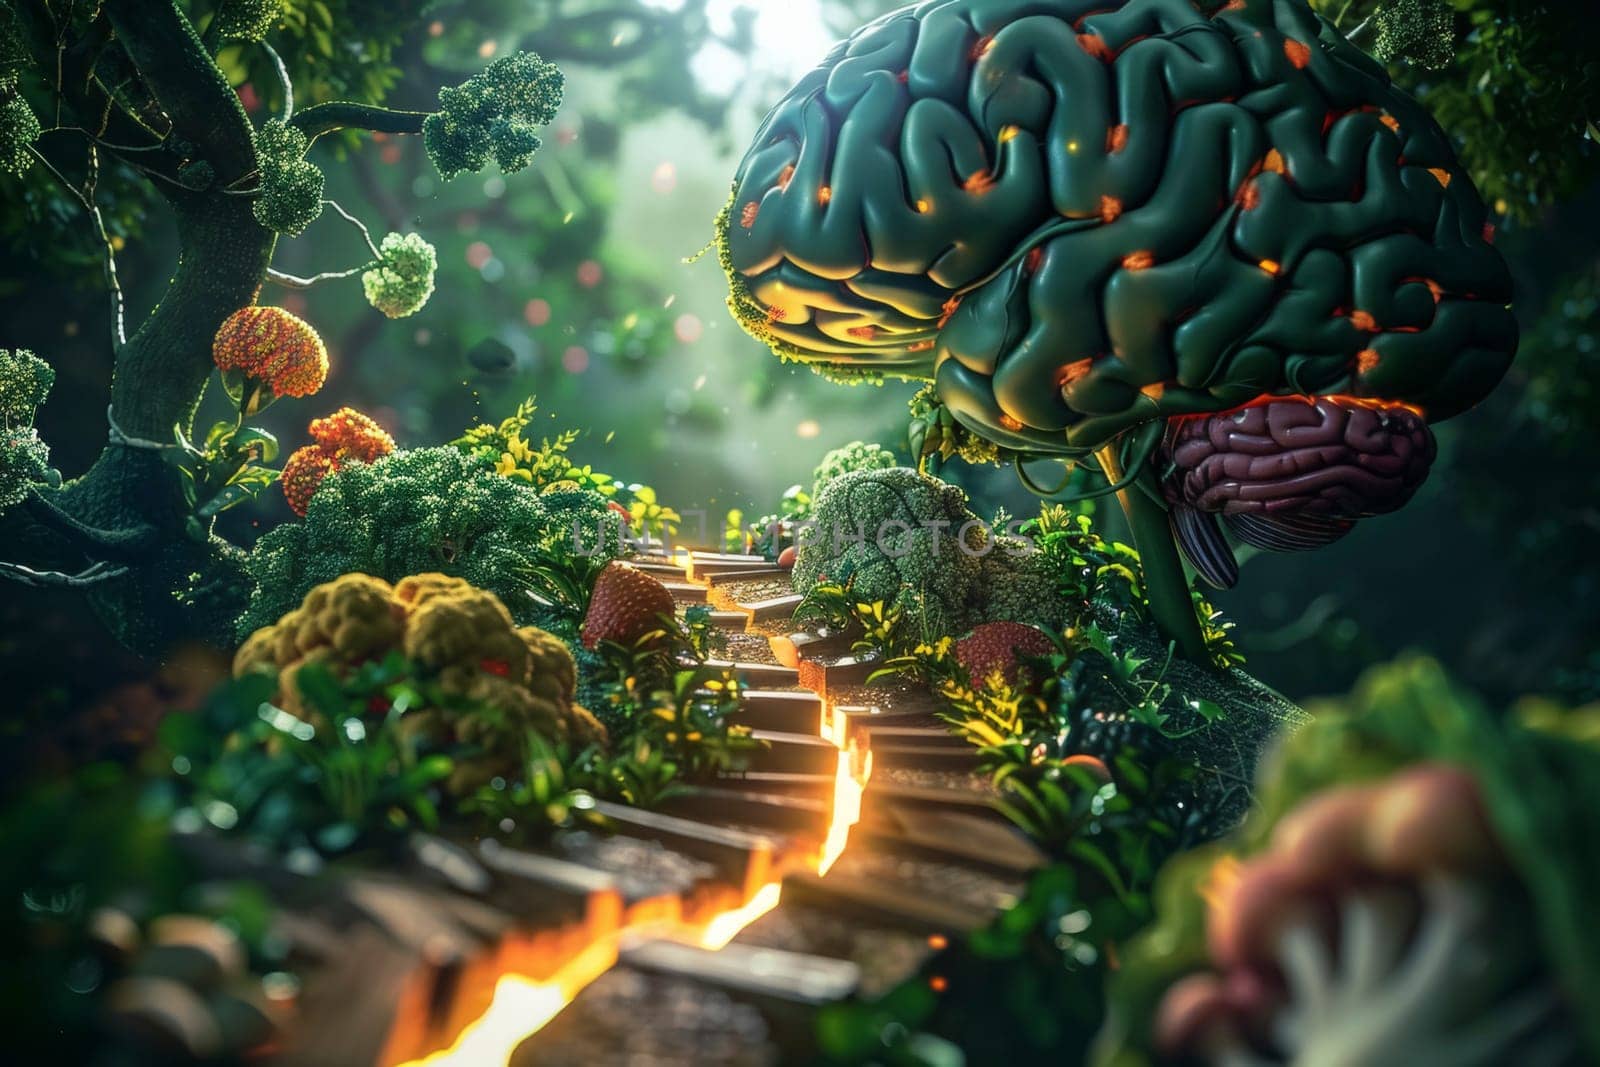 Digital art of a brain-shaped tree in a fantasy forest with fiery neural pathways. Creative concept for neurology and imagination with lush foliage and vibrant colors